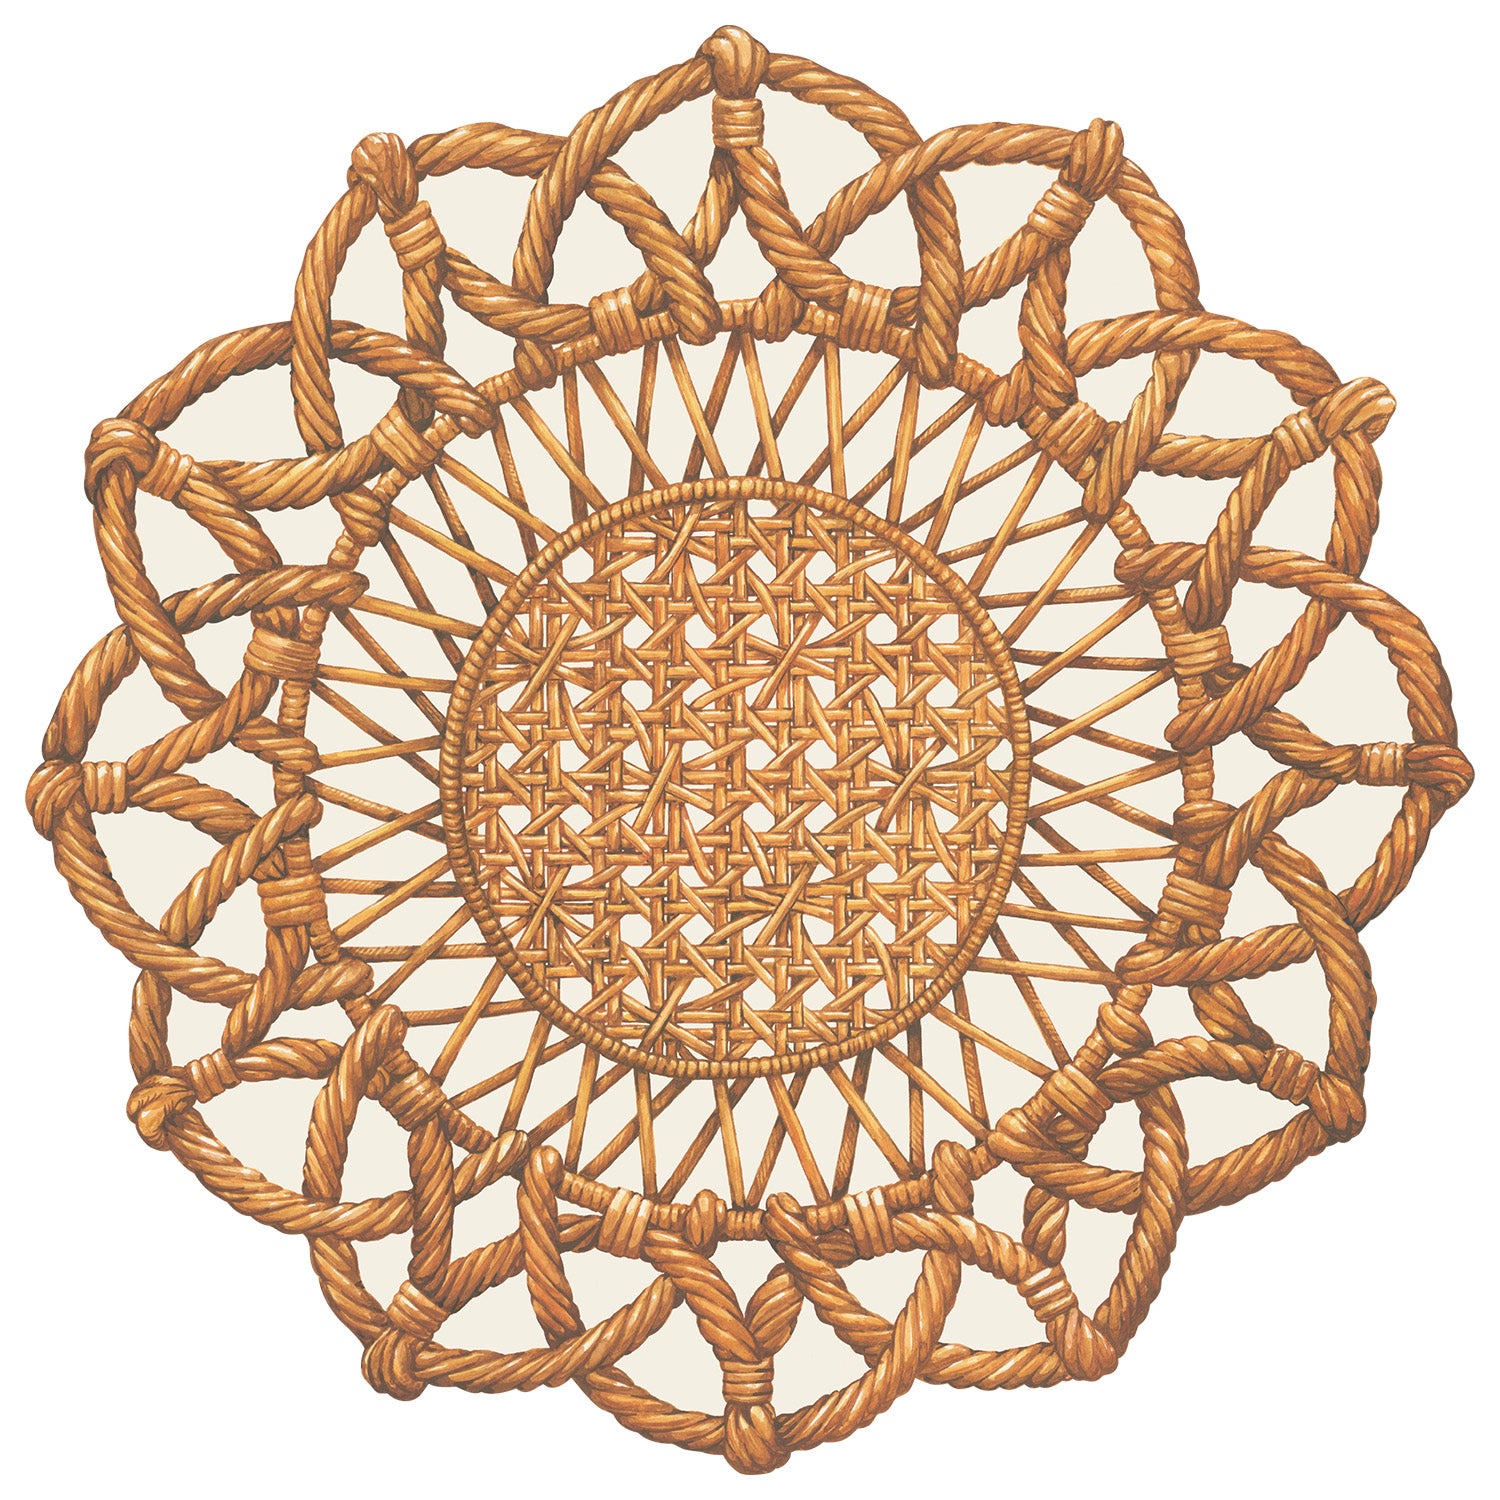 A Die-cut Rattan Weave Placemat with a circular design, made with a rattan weave placemat, from Hester &amp; Cook.